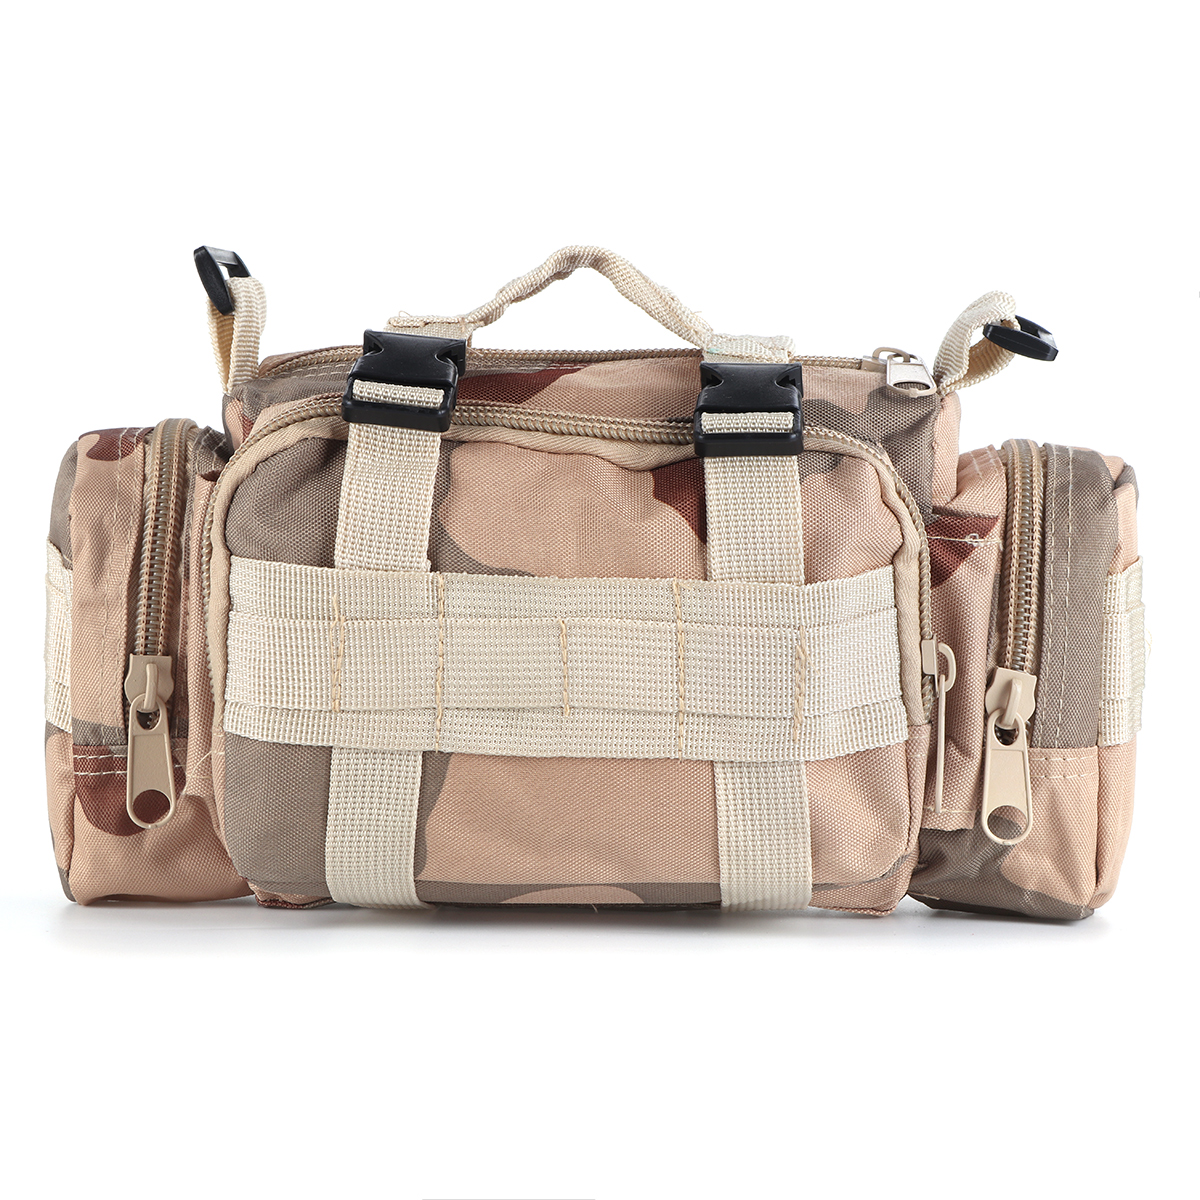 Multifunctional-Outdoor-Sports-Hiking-with-Zippers-Nylon-Oxford-Cloth-Tactical-Shoulder-Bag-Waist-Pa-1825563-14